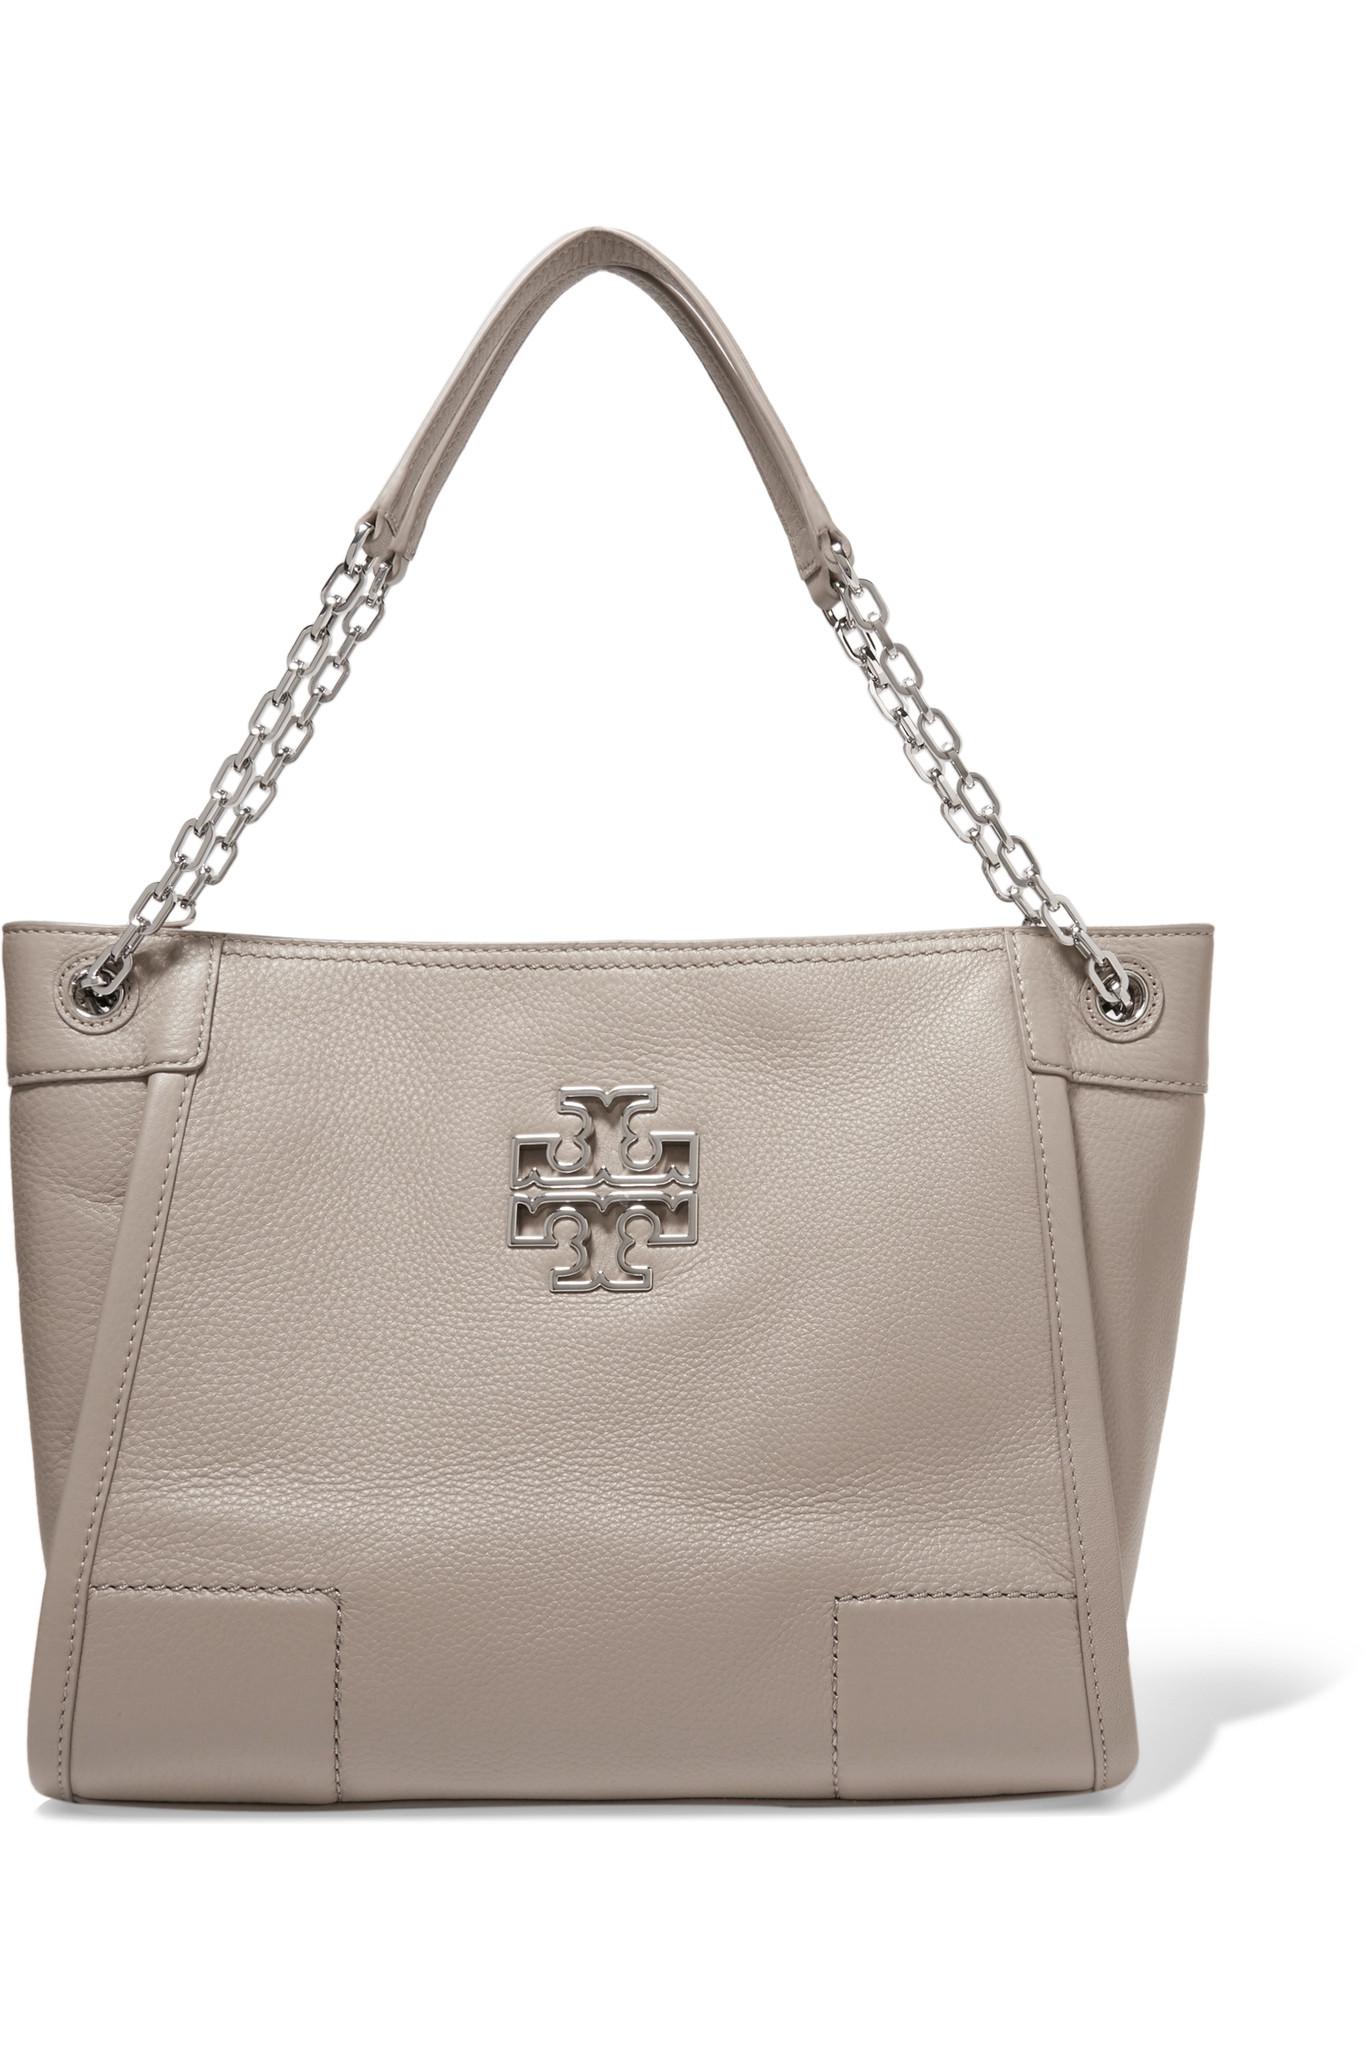 Tory burch Britten Leather Shoulder Bag in Gray | Lyst